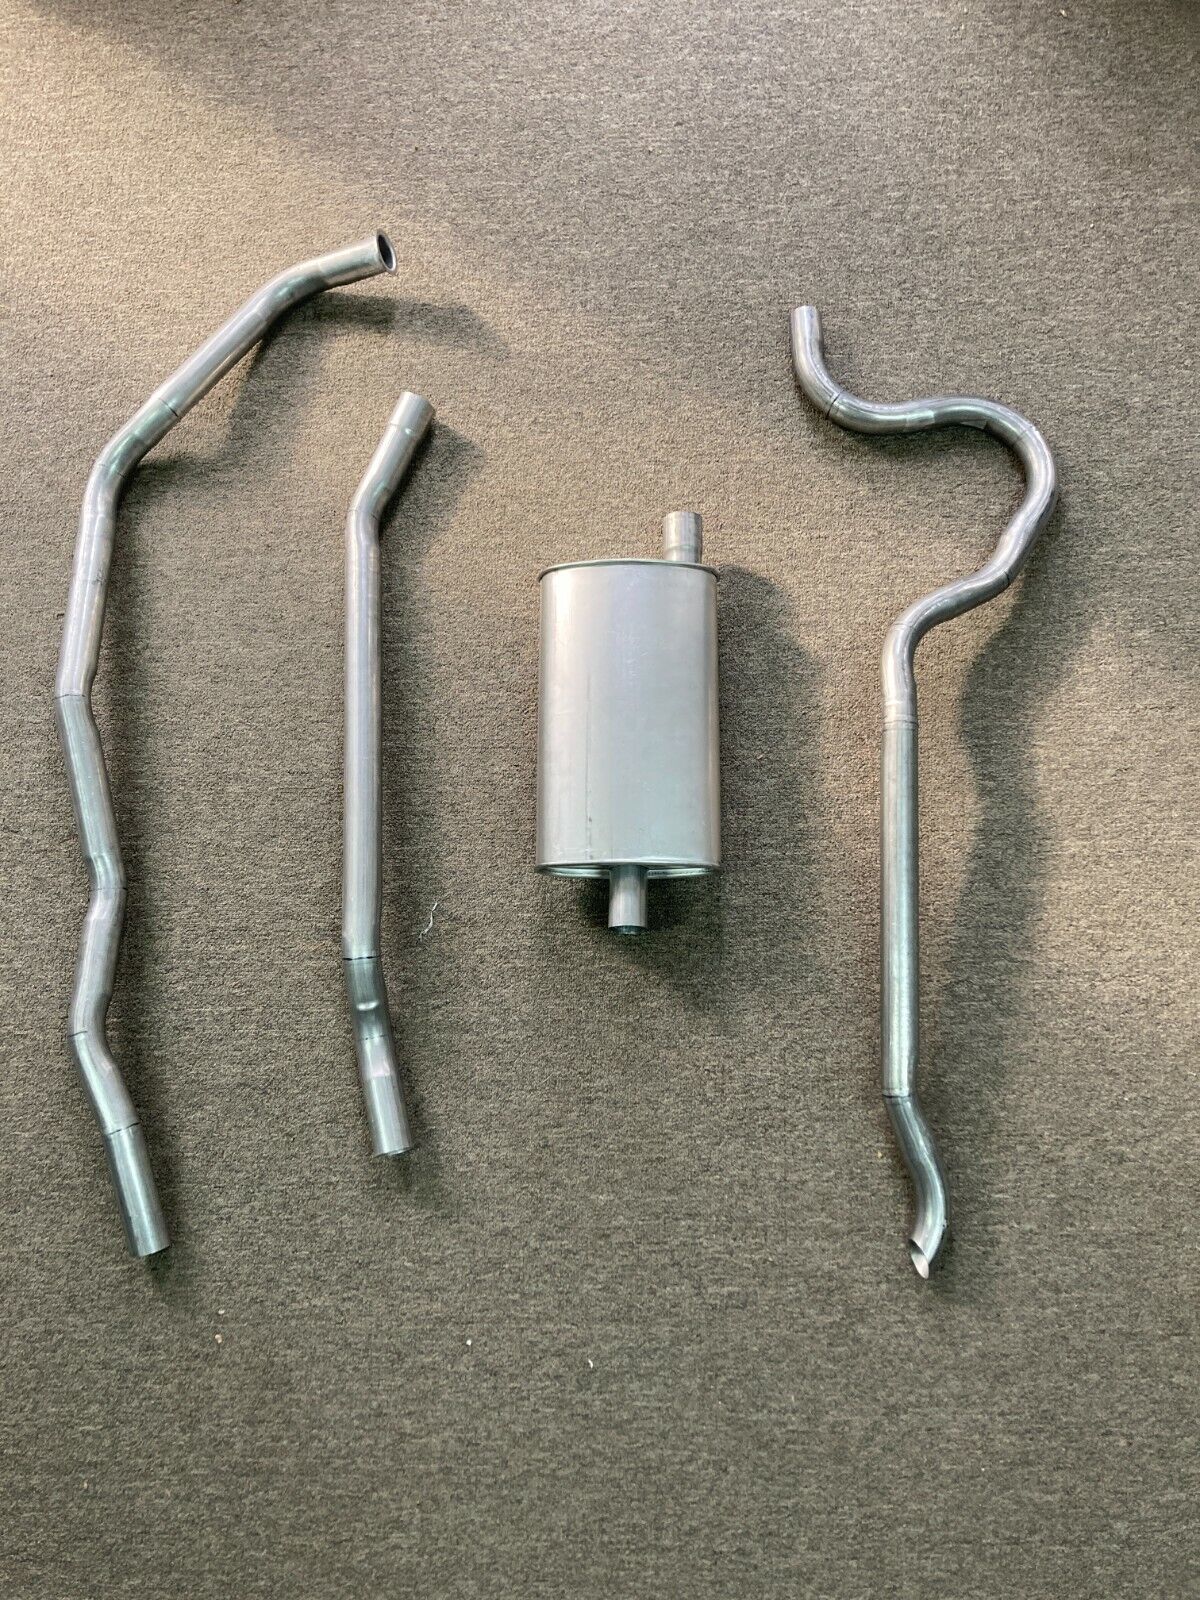 1972, 1973, 1974, 1975, 1976 Plymouth Valiant Slant 6 Cylinder Exhaust System